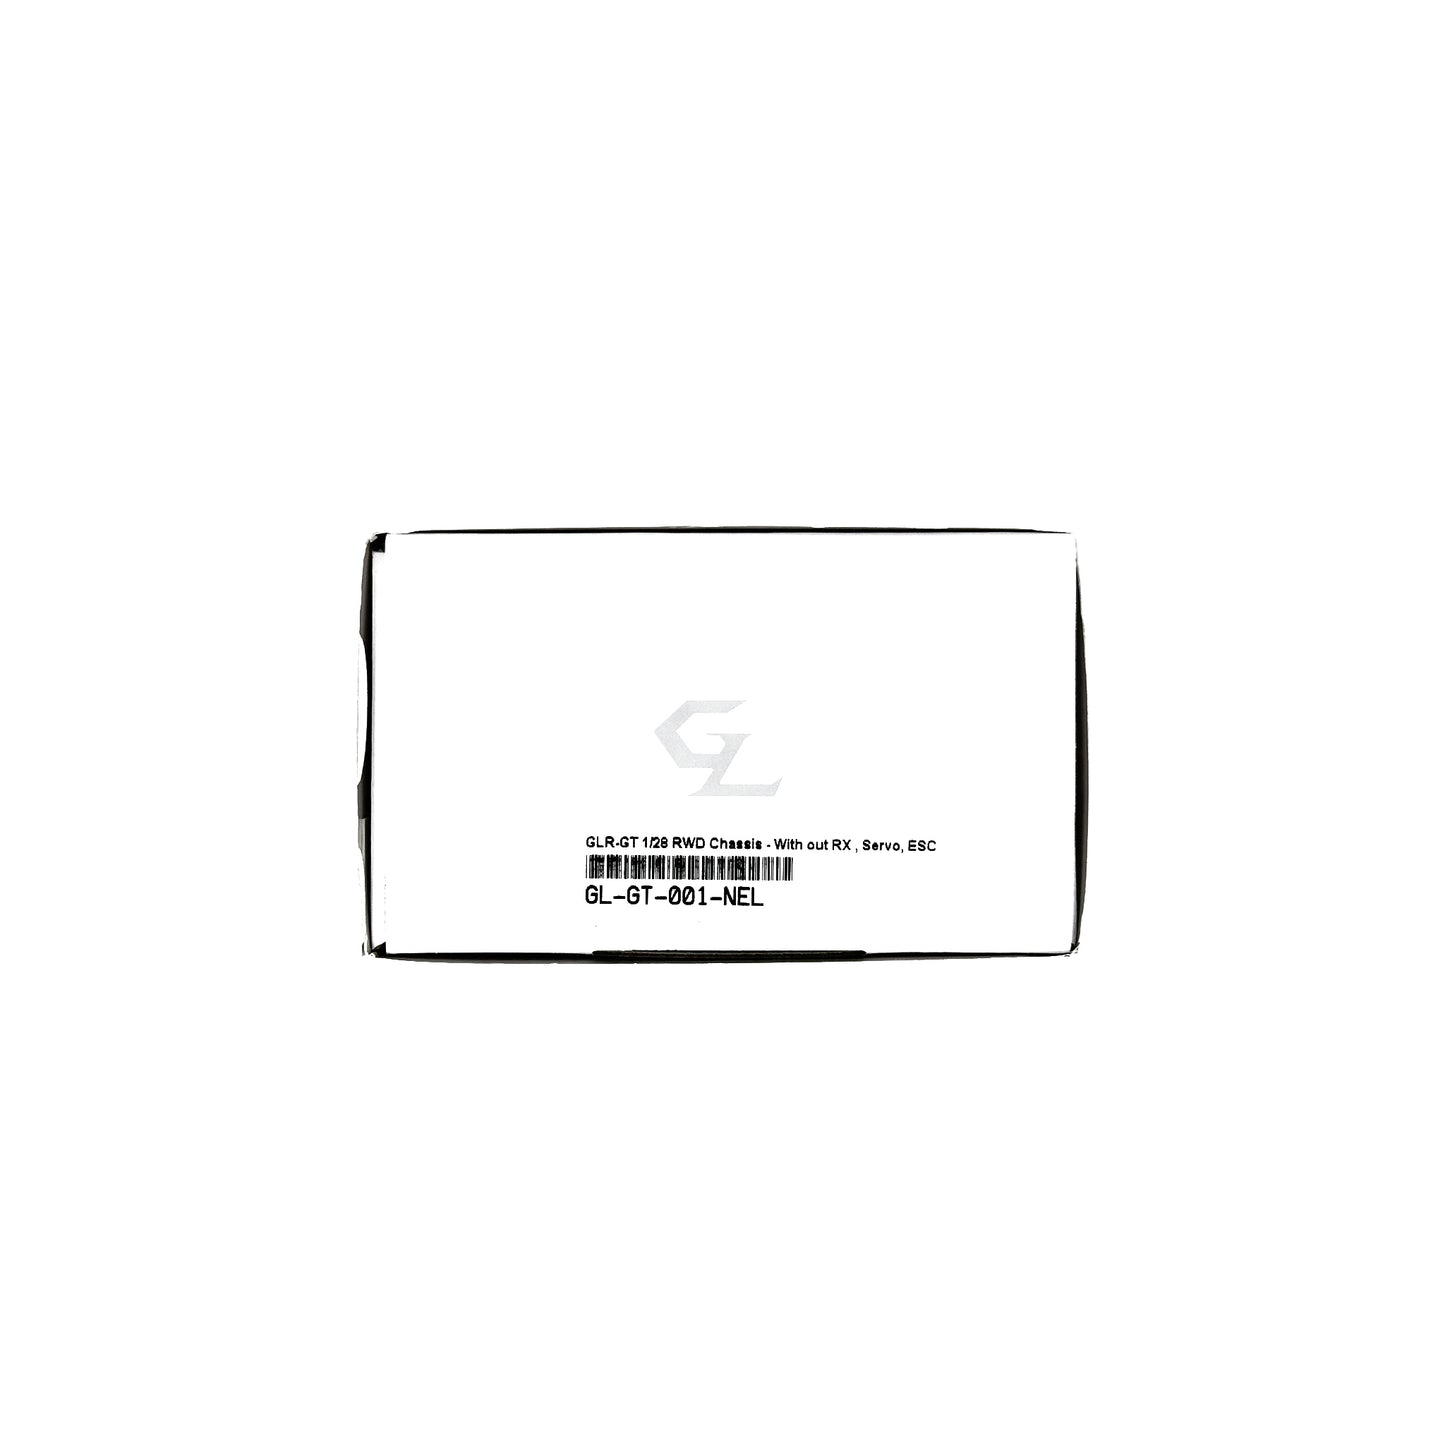 GLR - GT RWD Chassis GL-GT-001-NEL